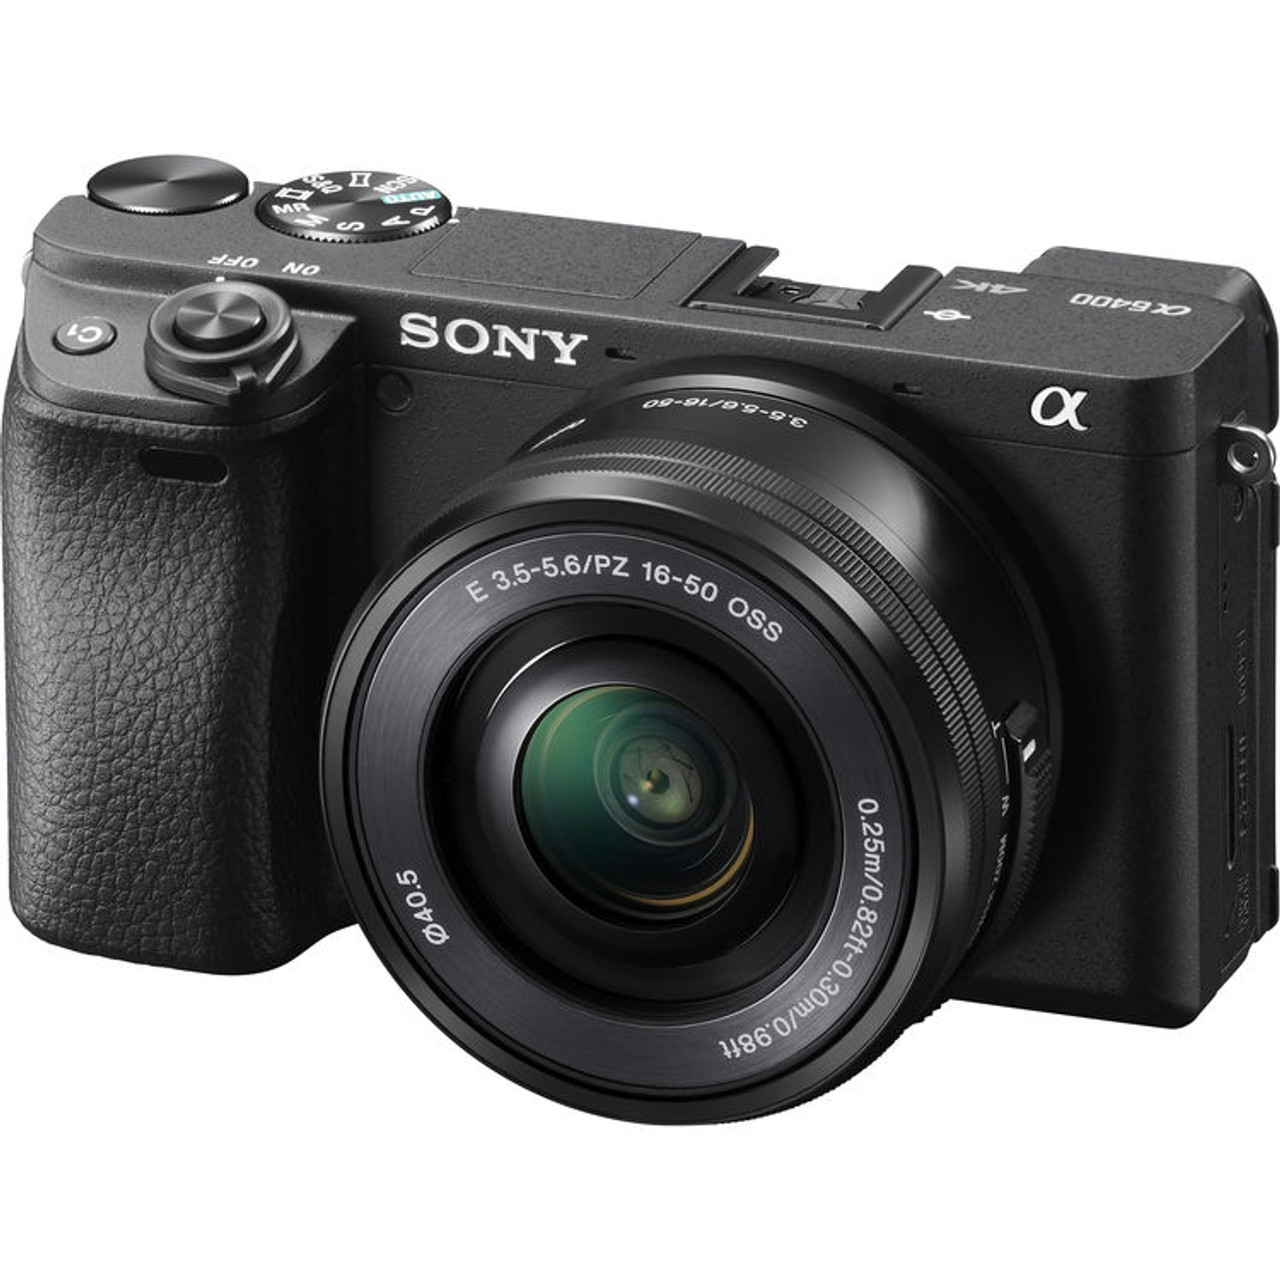 SONY ALPHA a6400 WITH 16-50MM (KIT) BLACK